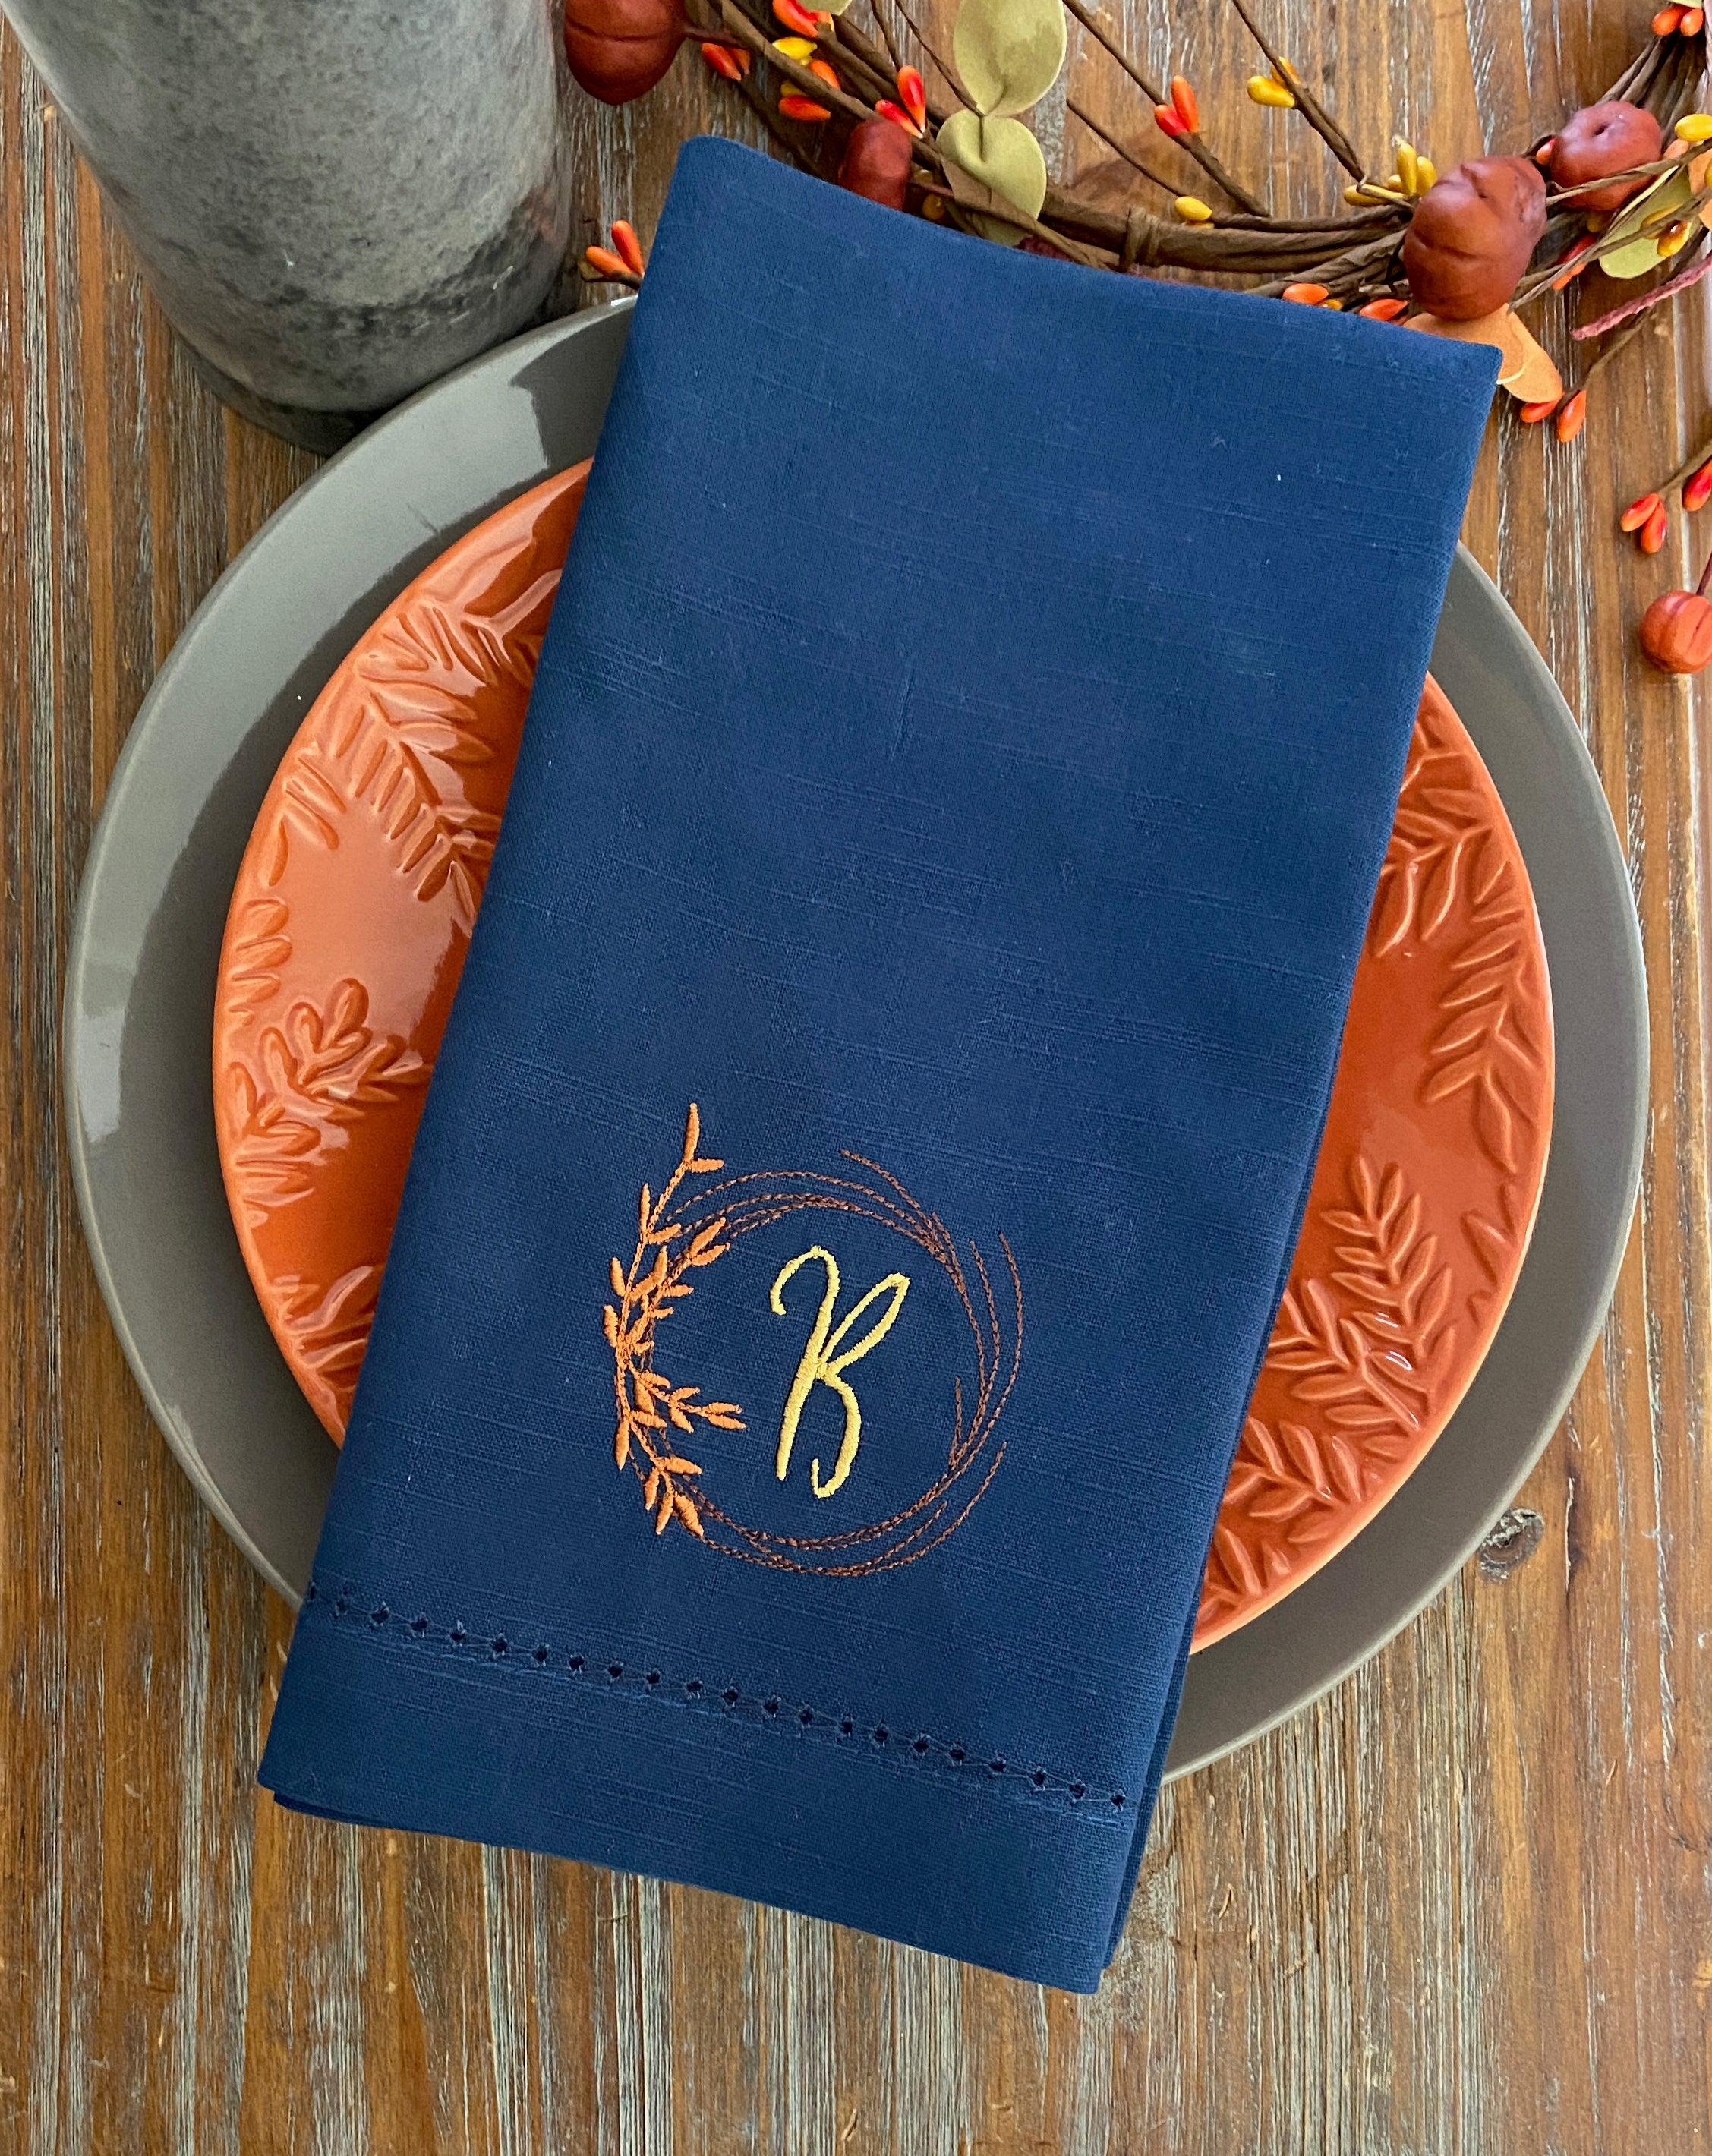 Light Blue Monogram Wedding Personalized Napkins with Gold Foil - Luncheon